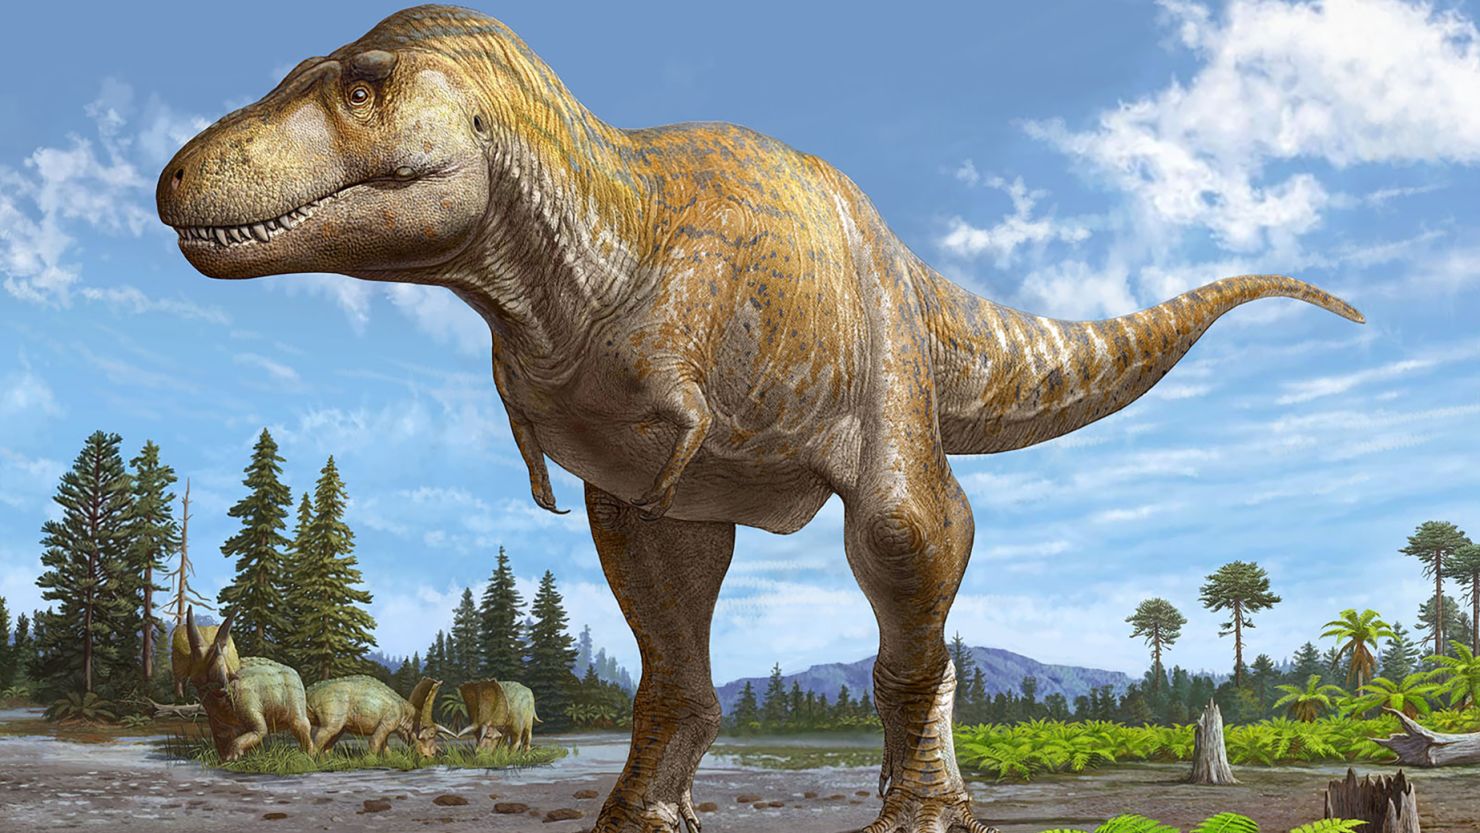 T. rex fossil is actually a species new to science, study says